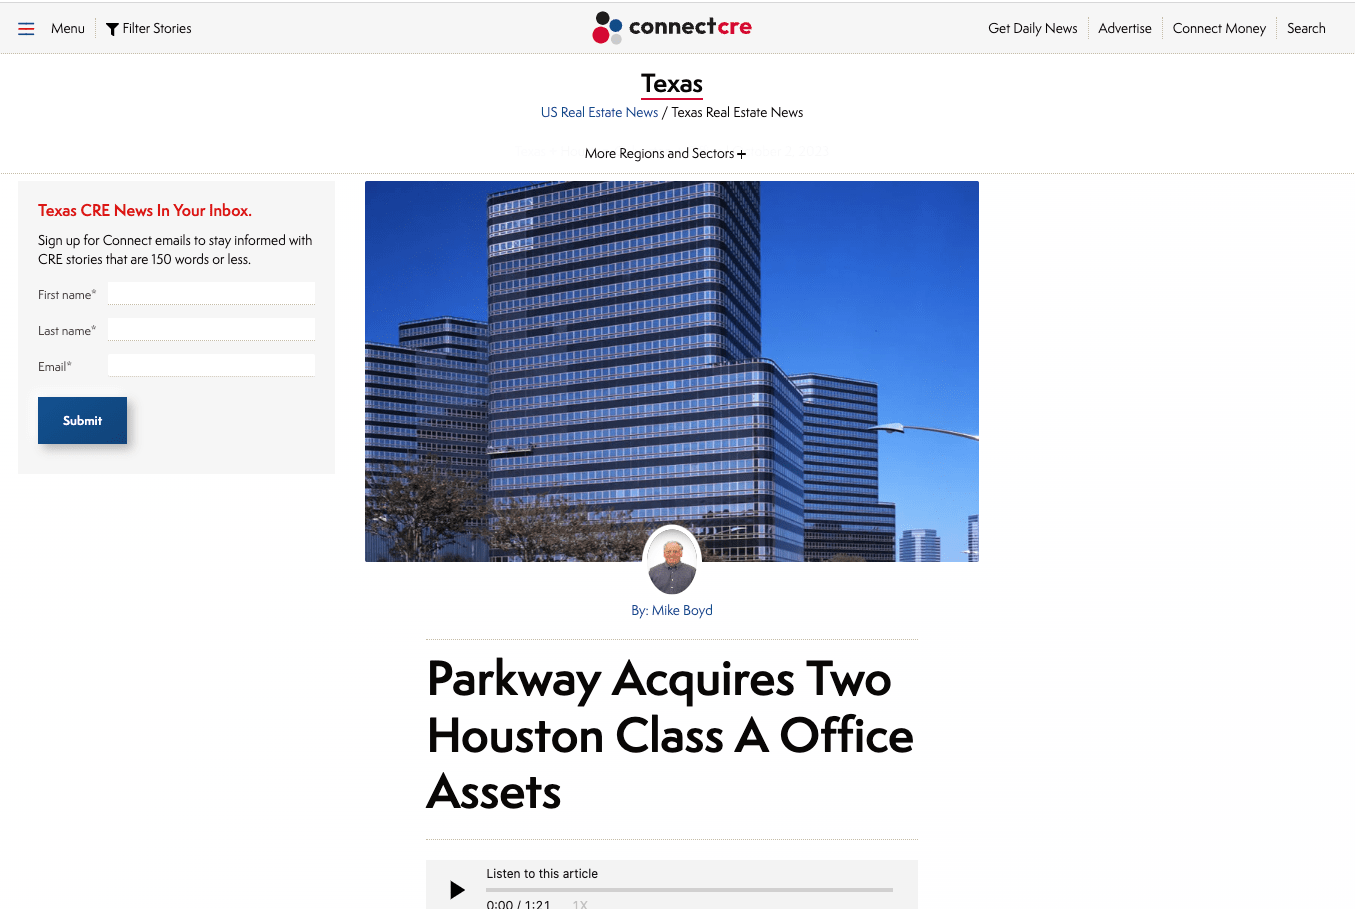 Parkway Acquires Two Houston Class A Office Assets